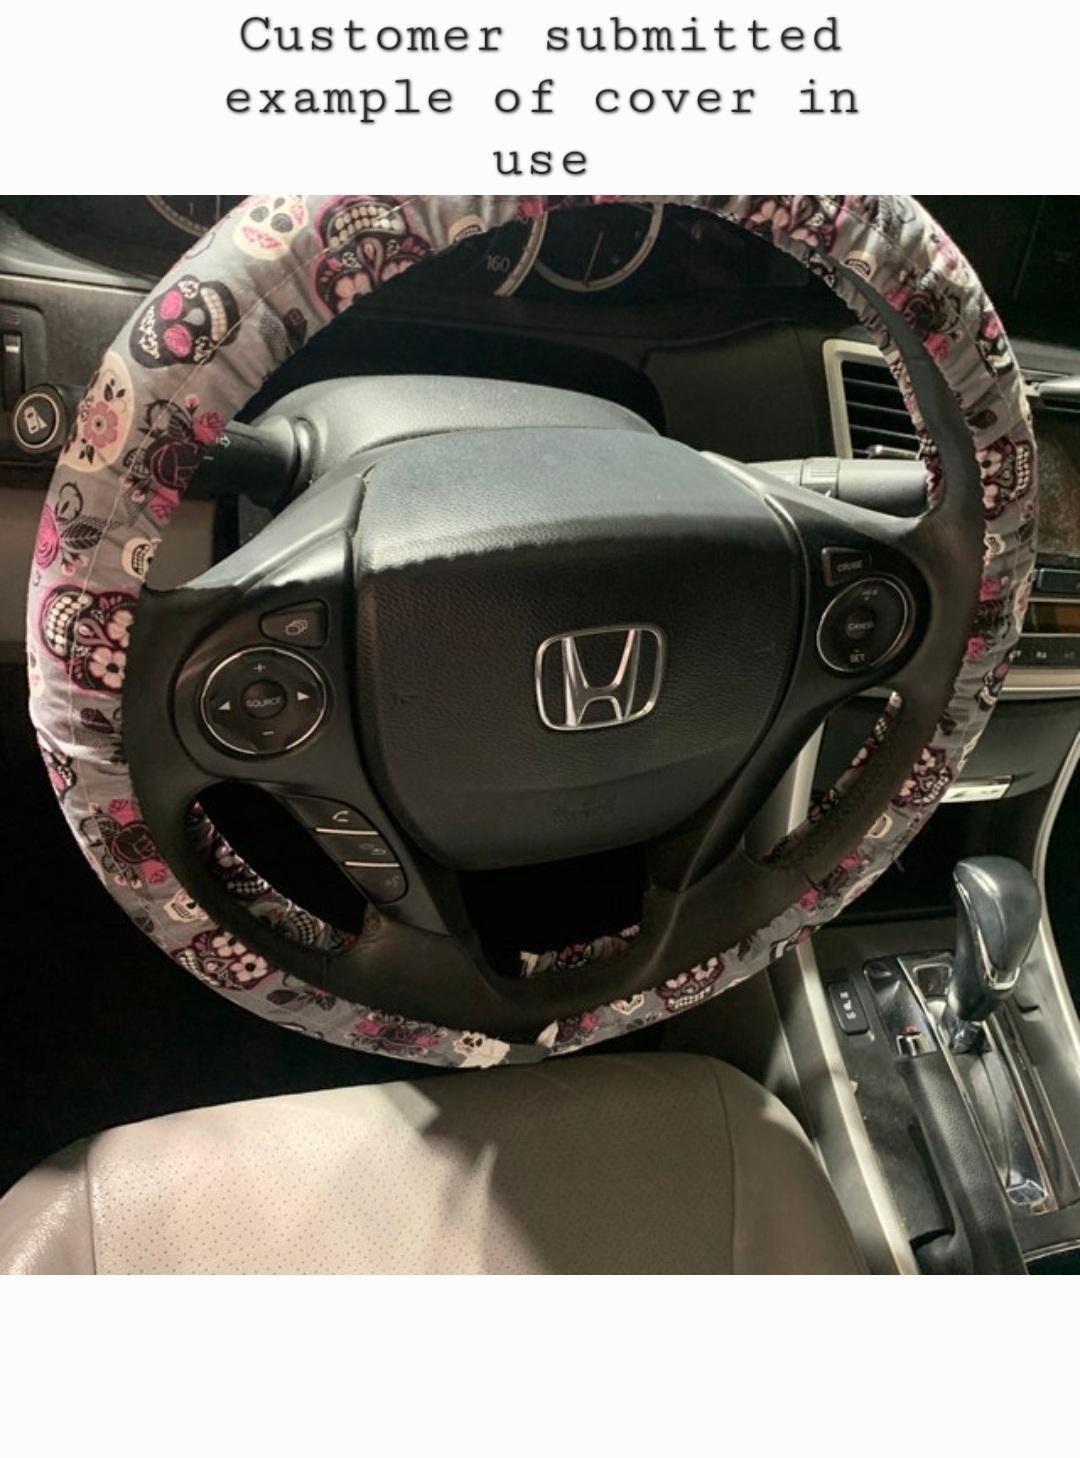 Floral Steering Wheel Cover, Custom Car Accessories, 100% Cotton Washable - Harlow's Store and Garden Gifts